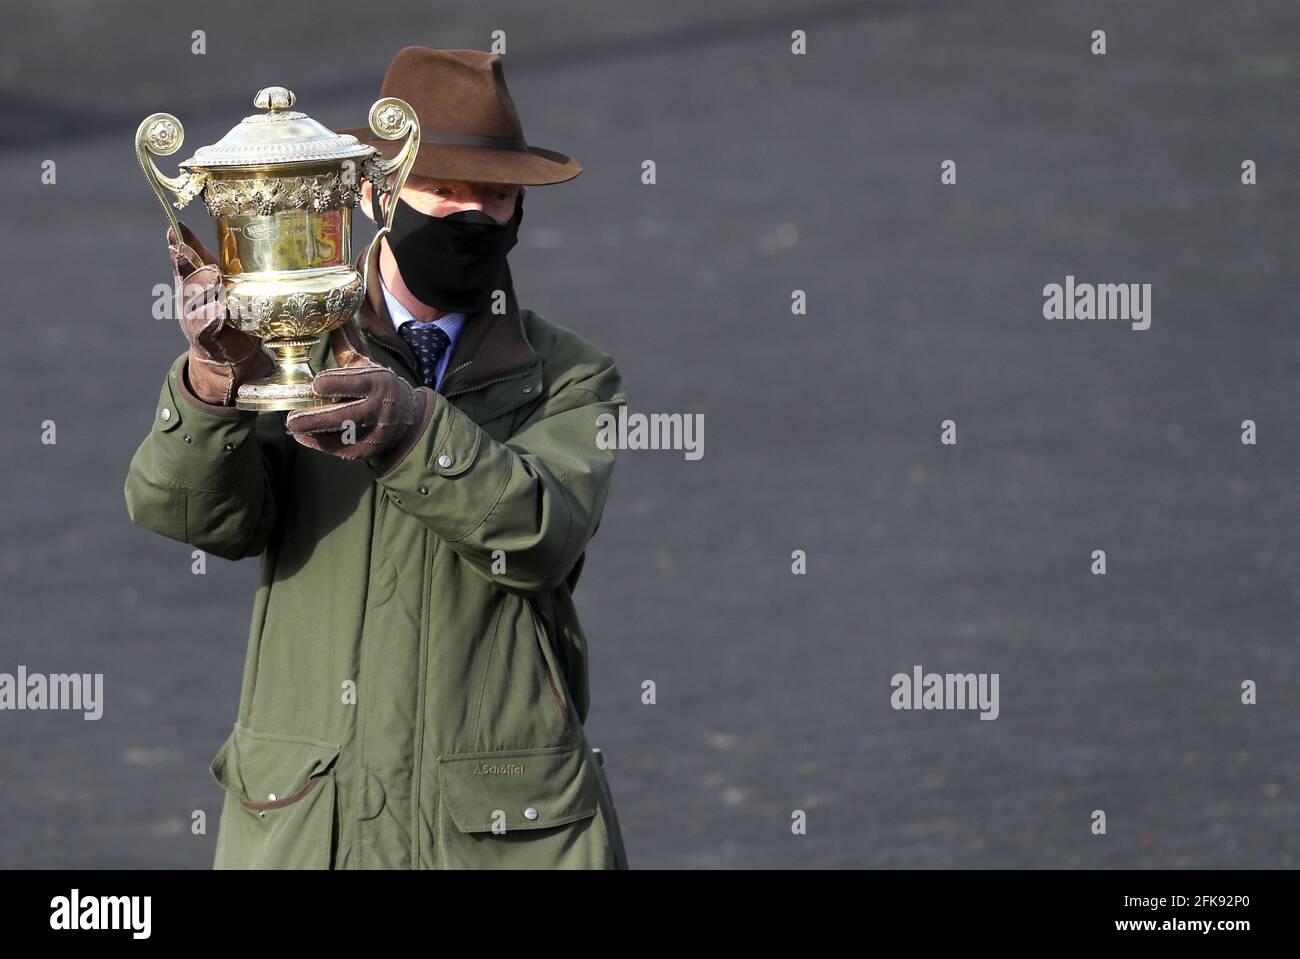 William Mullins, trainer of Klassical Dream, celebrates winning the Ladbrokes Champion Stayers Hurdle trophy during Day Three of the Punchestown Festival at Punchestown Racecourse in County Kildare, Ireland. Issue date: Thursday April 29, 2021. Stock Photo